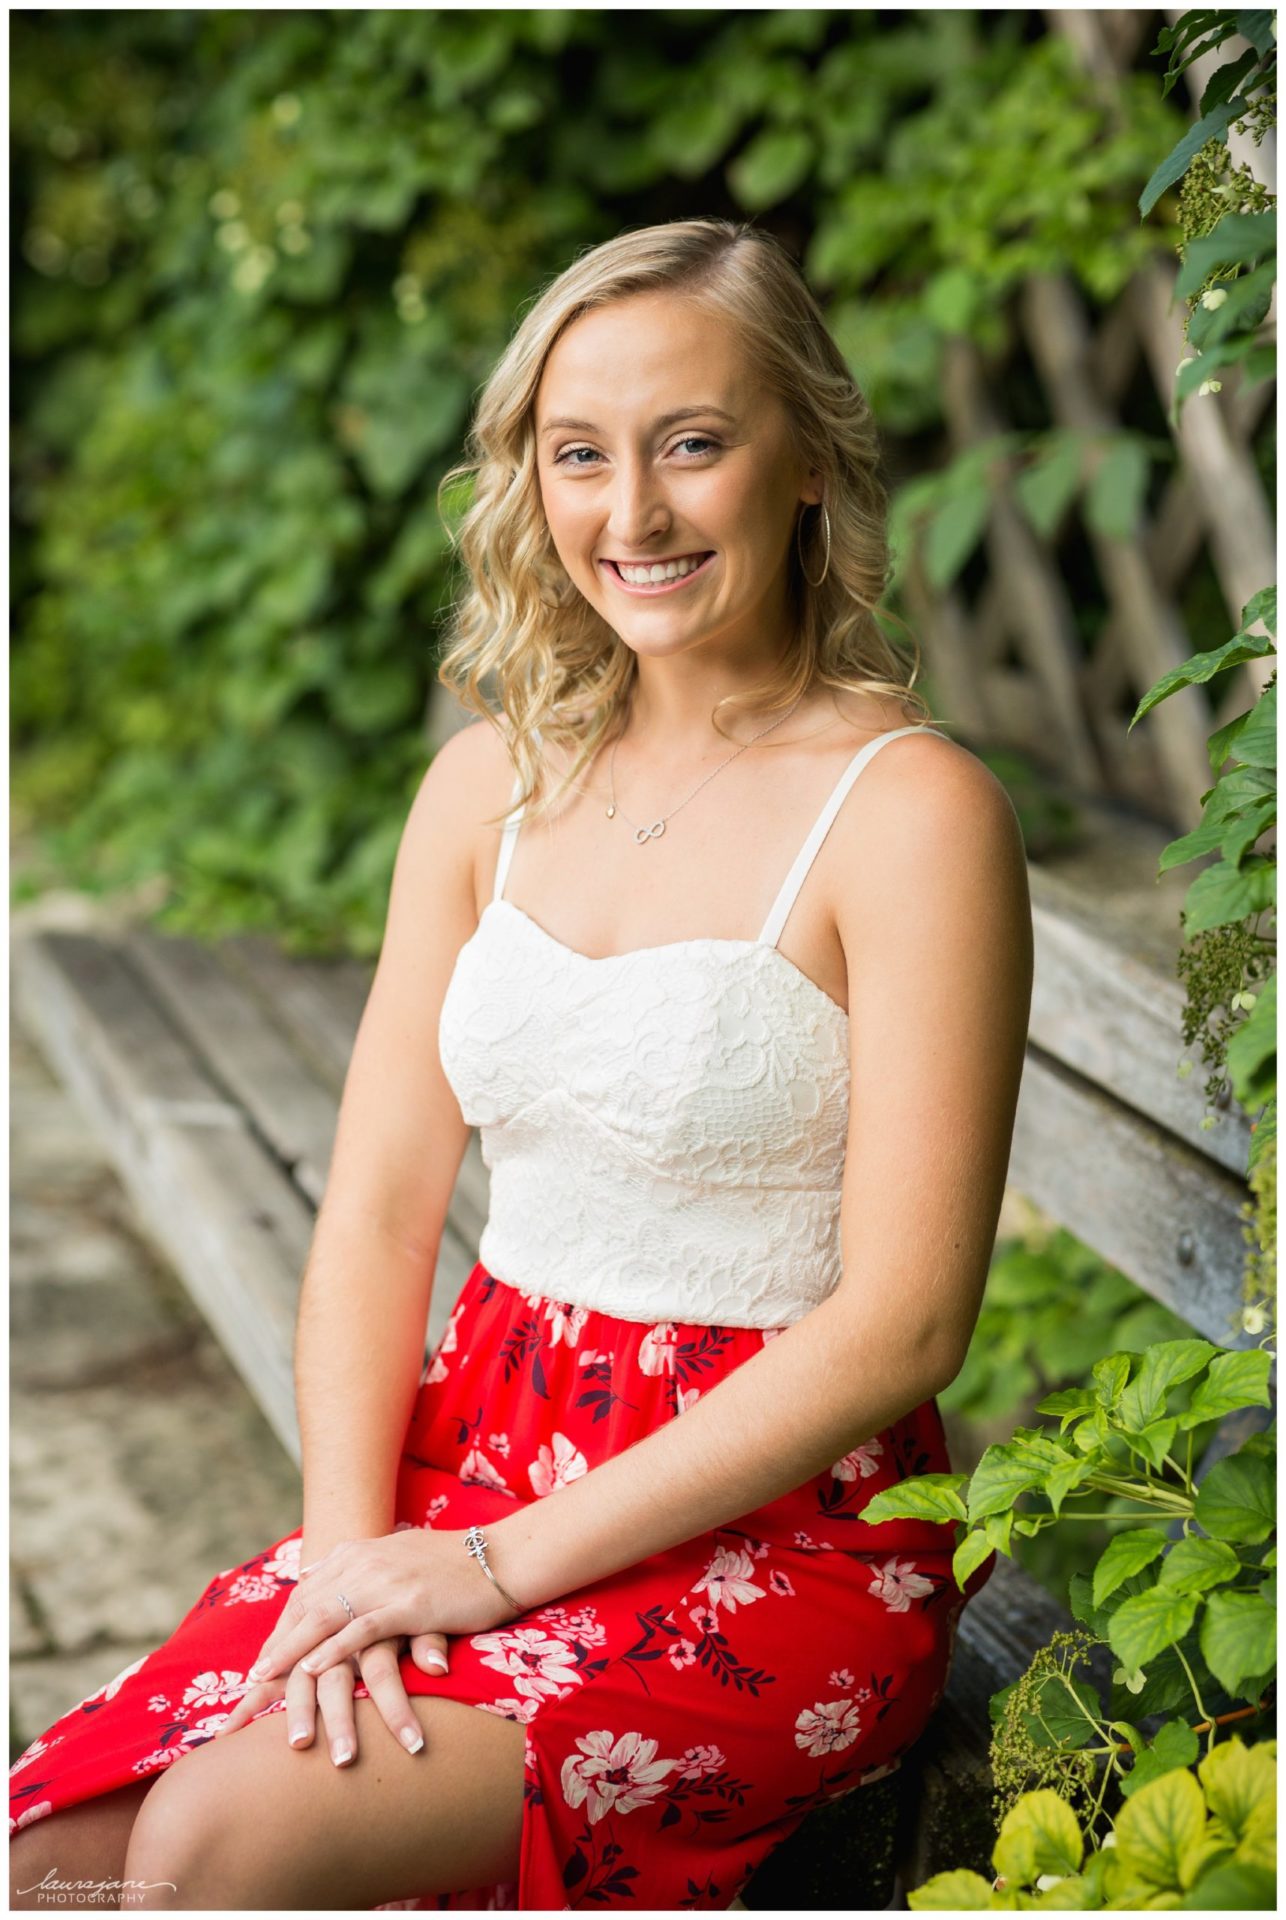 Senior portraits at Frame Park in Waukesha by Wisconsin photographer